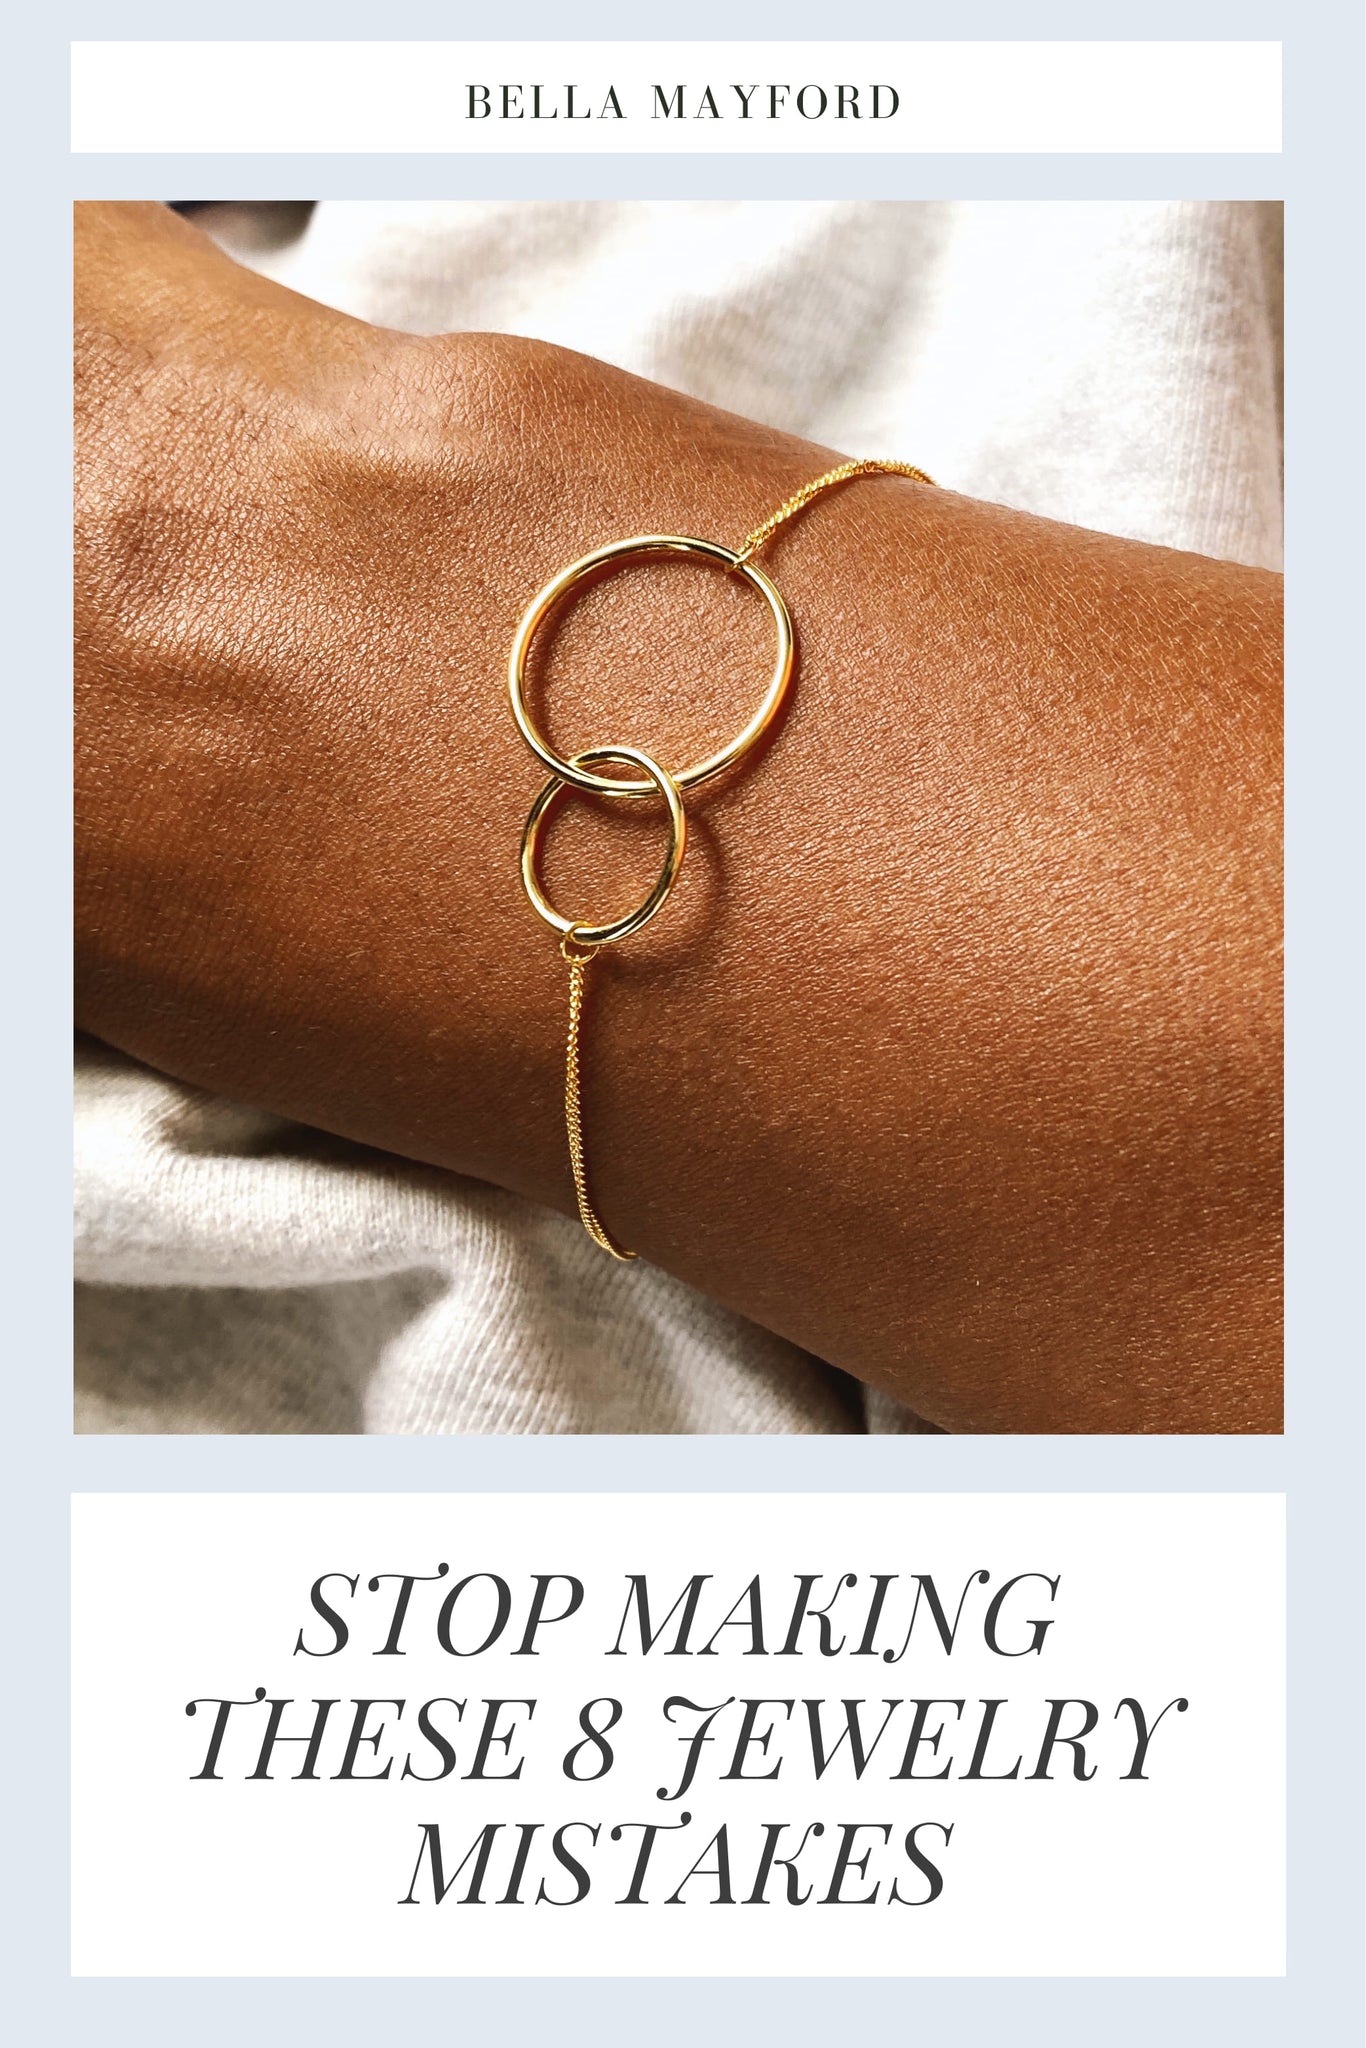 WE WISH YOU'D STOP MAKING THESE 8 JEWELRY MISTAKES